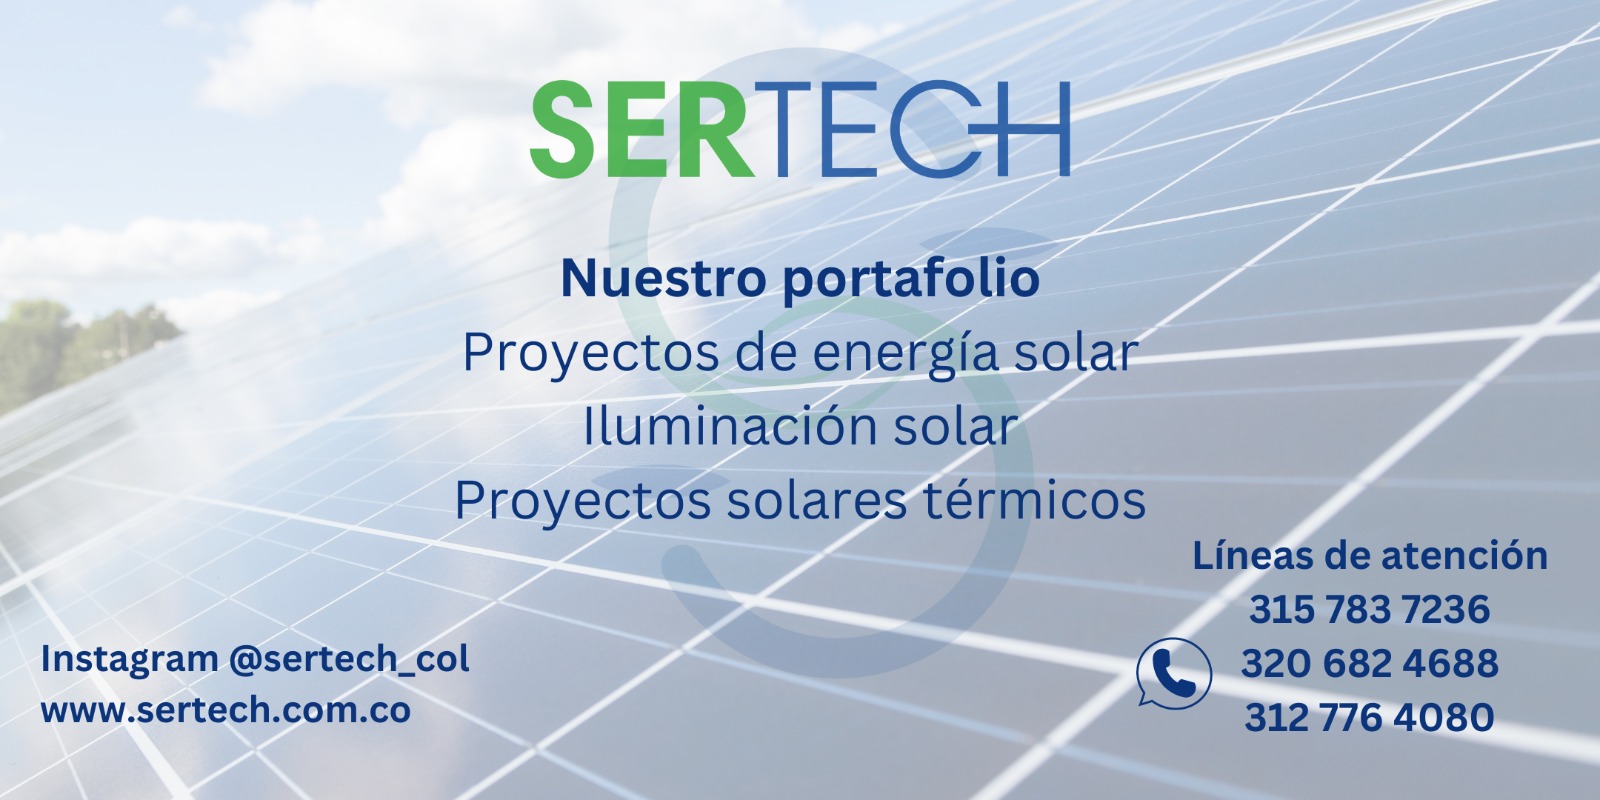 SERTECH COLOMBIA S.A.S